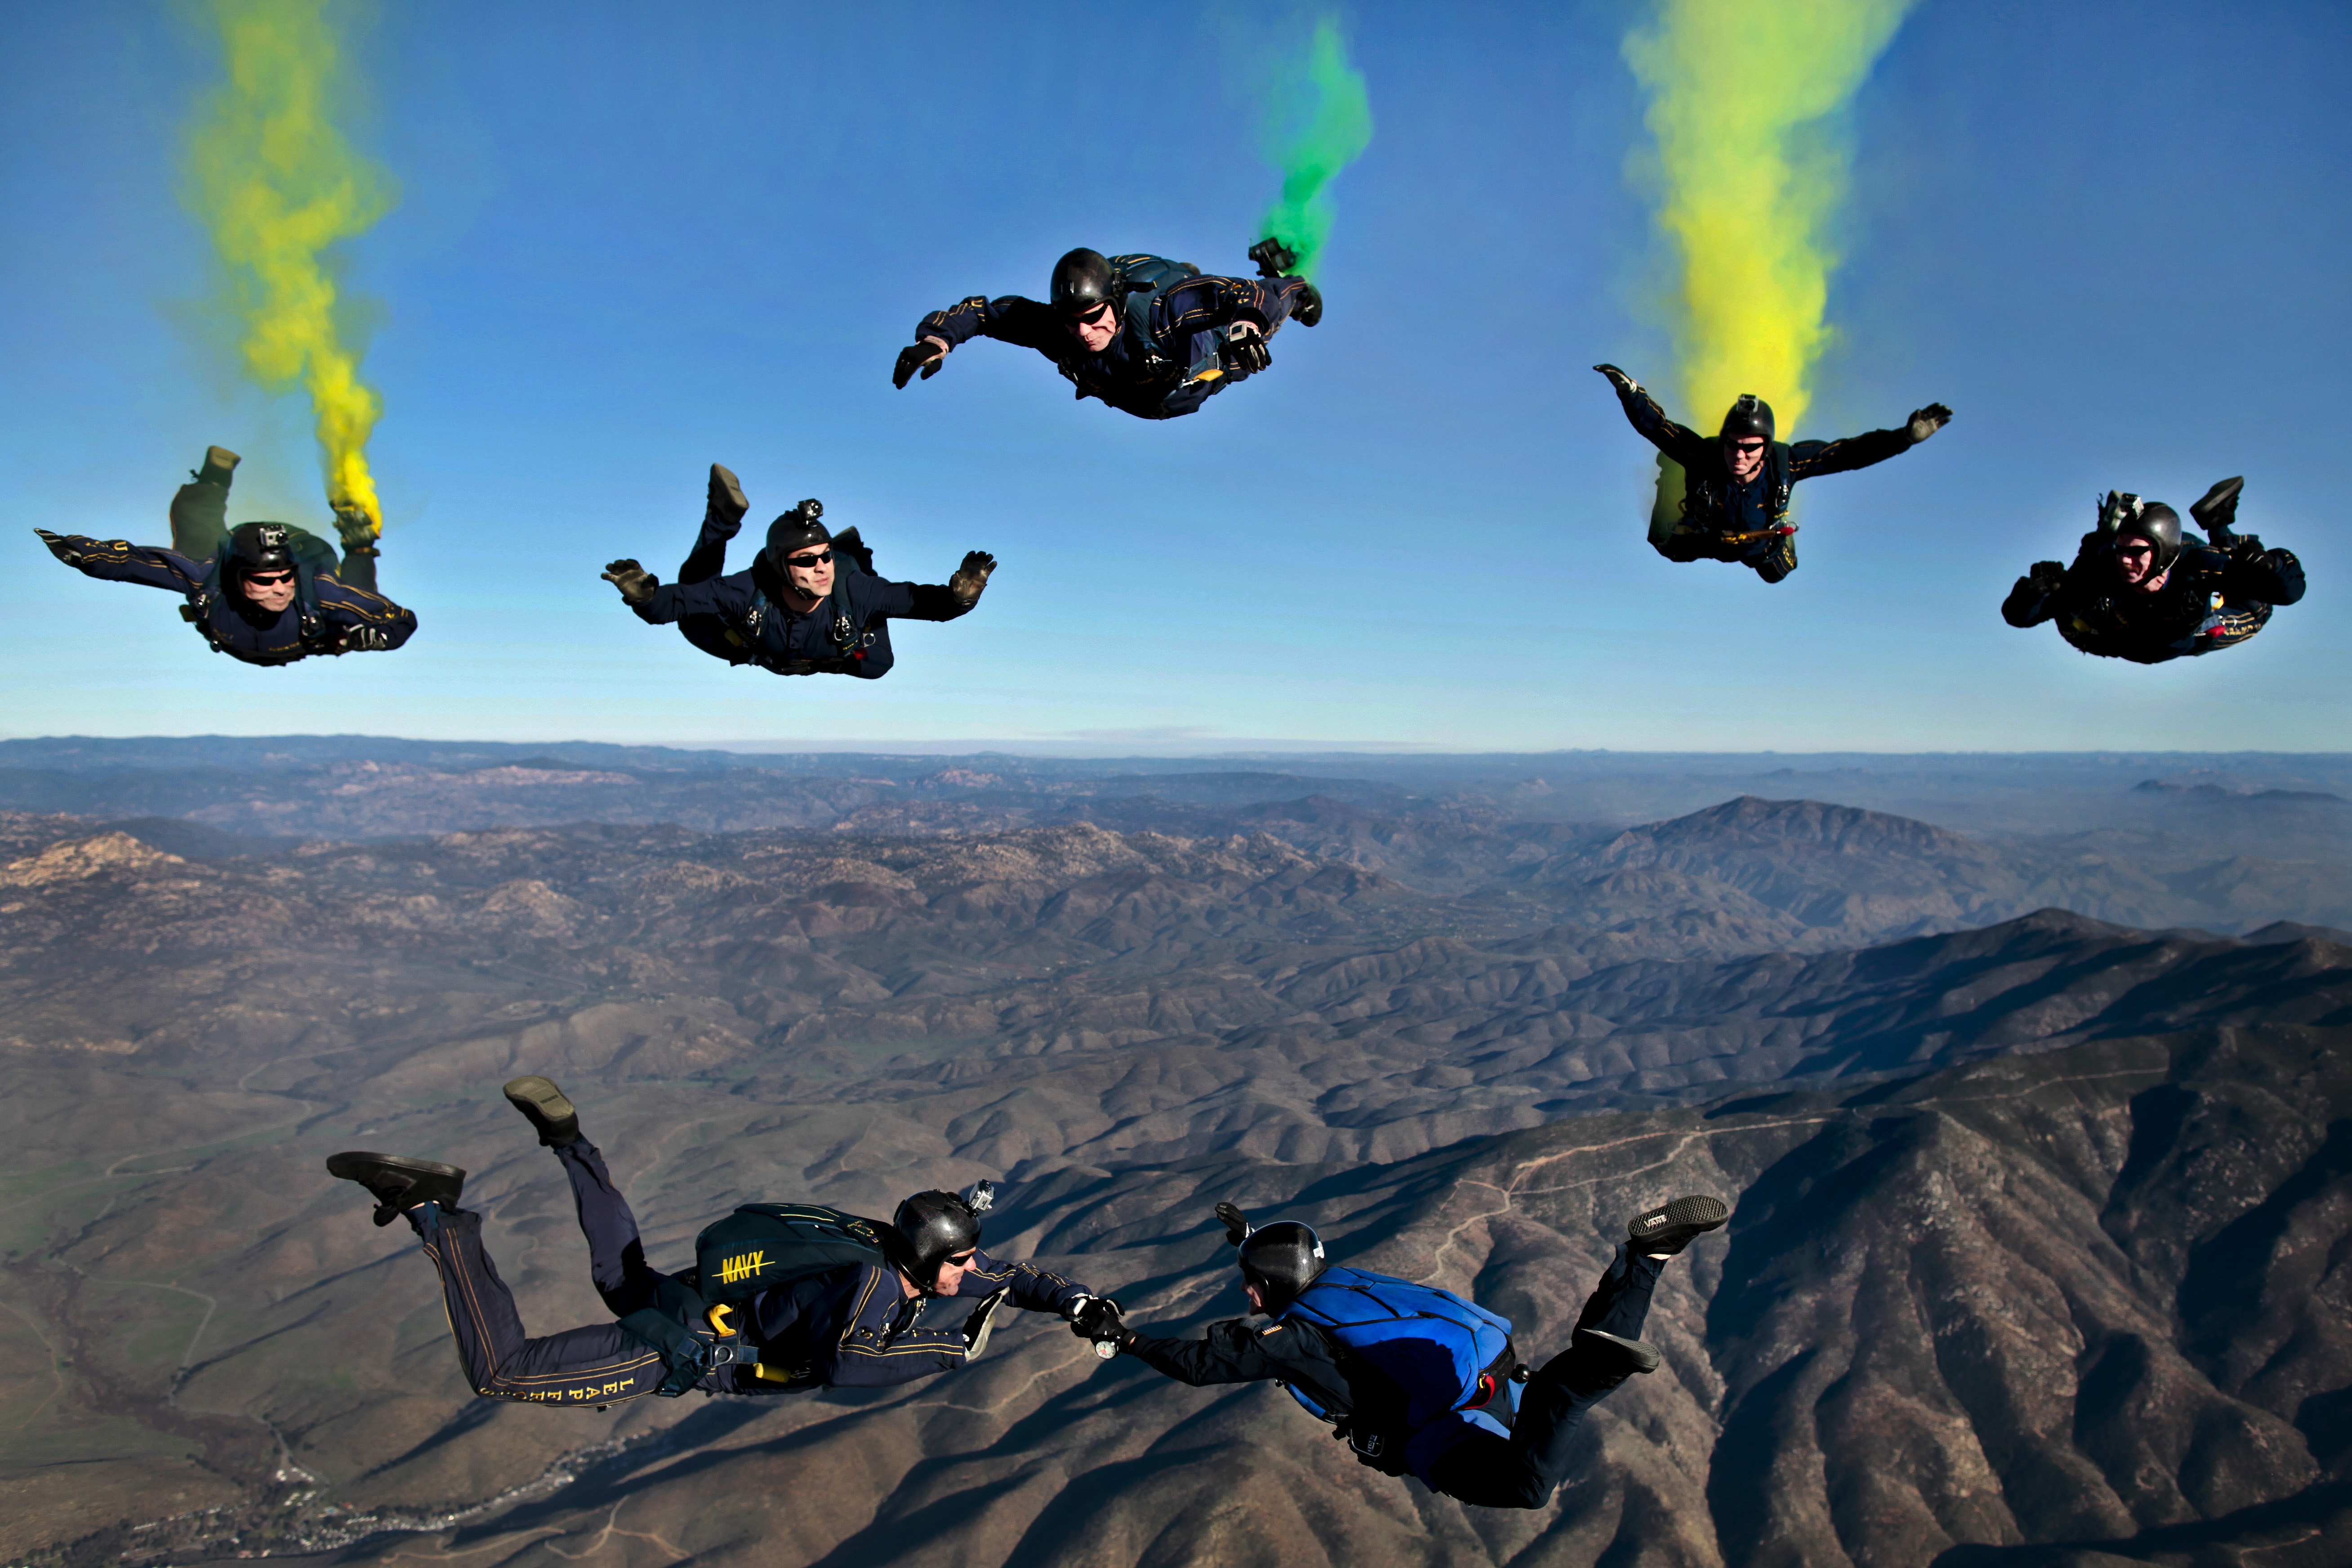 skydiving activity free image Peakpx